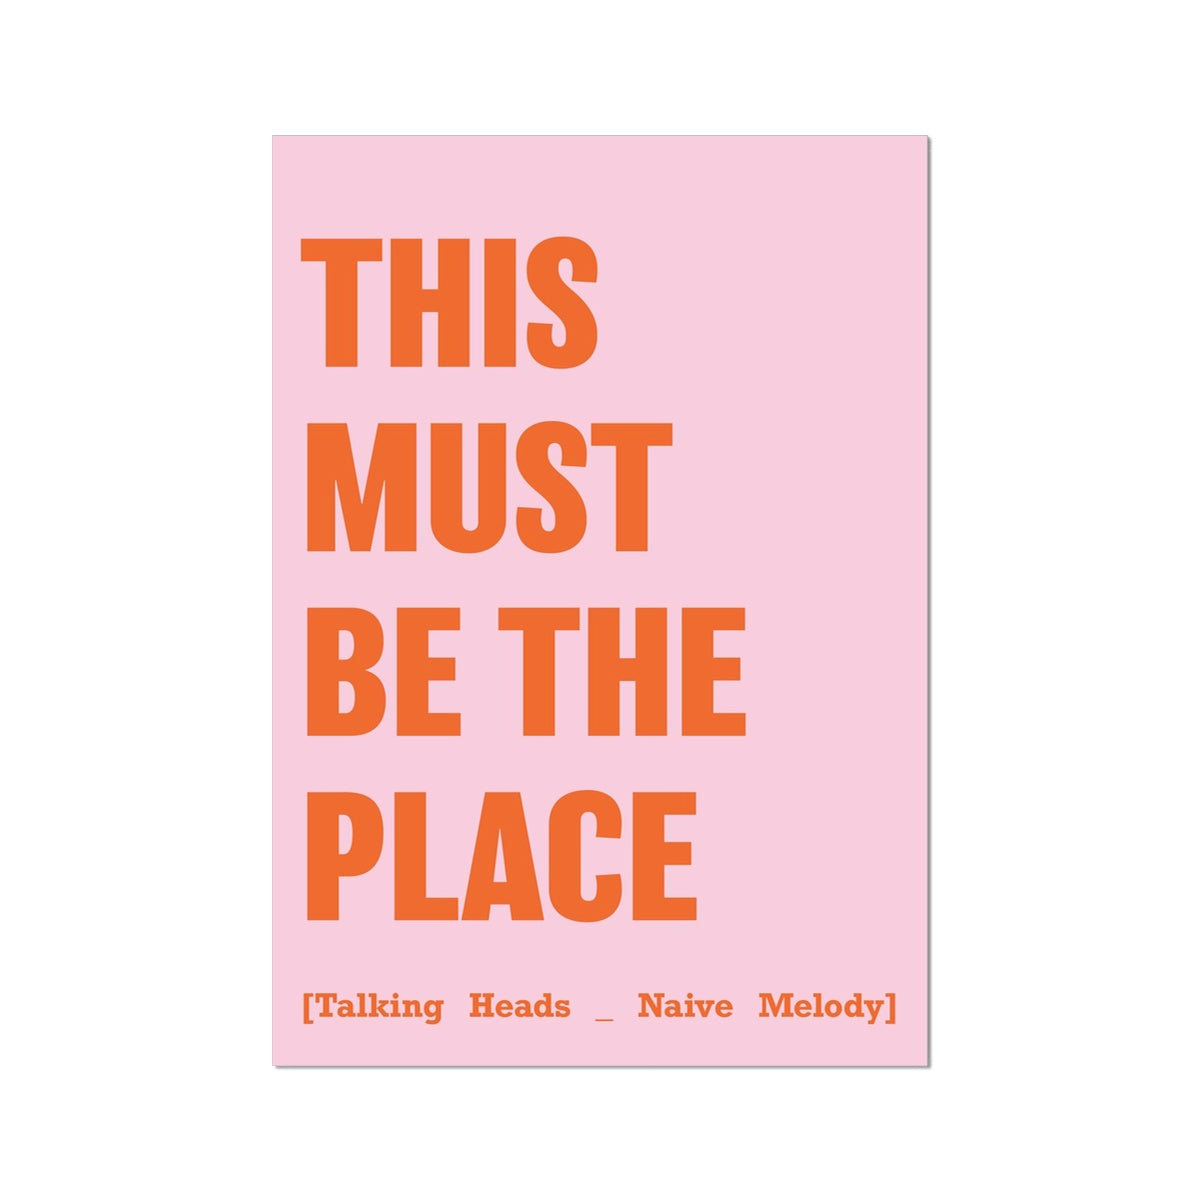 This must be the place, song lyric print, talking heads  lyric print in pink and framed in natural wood.